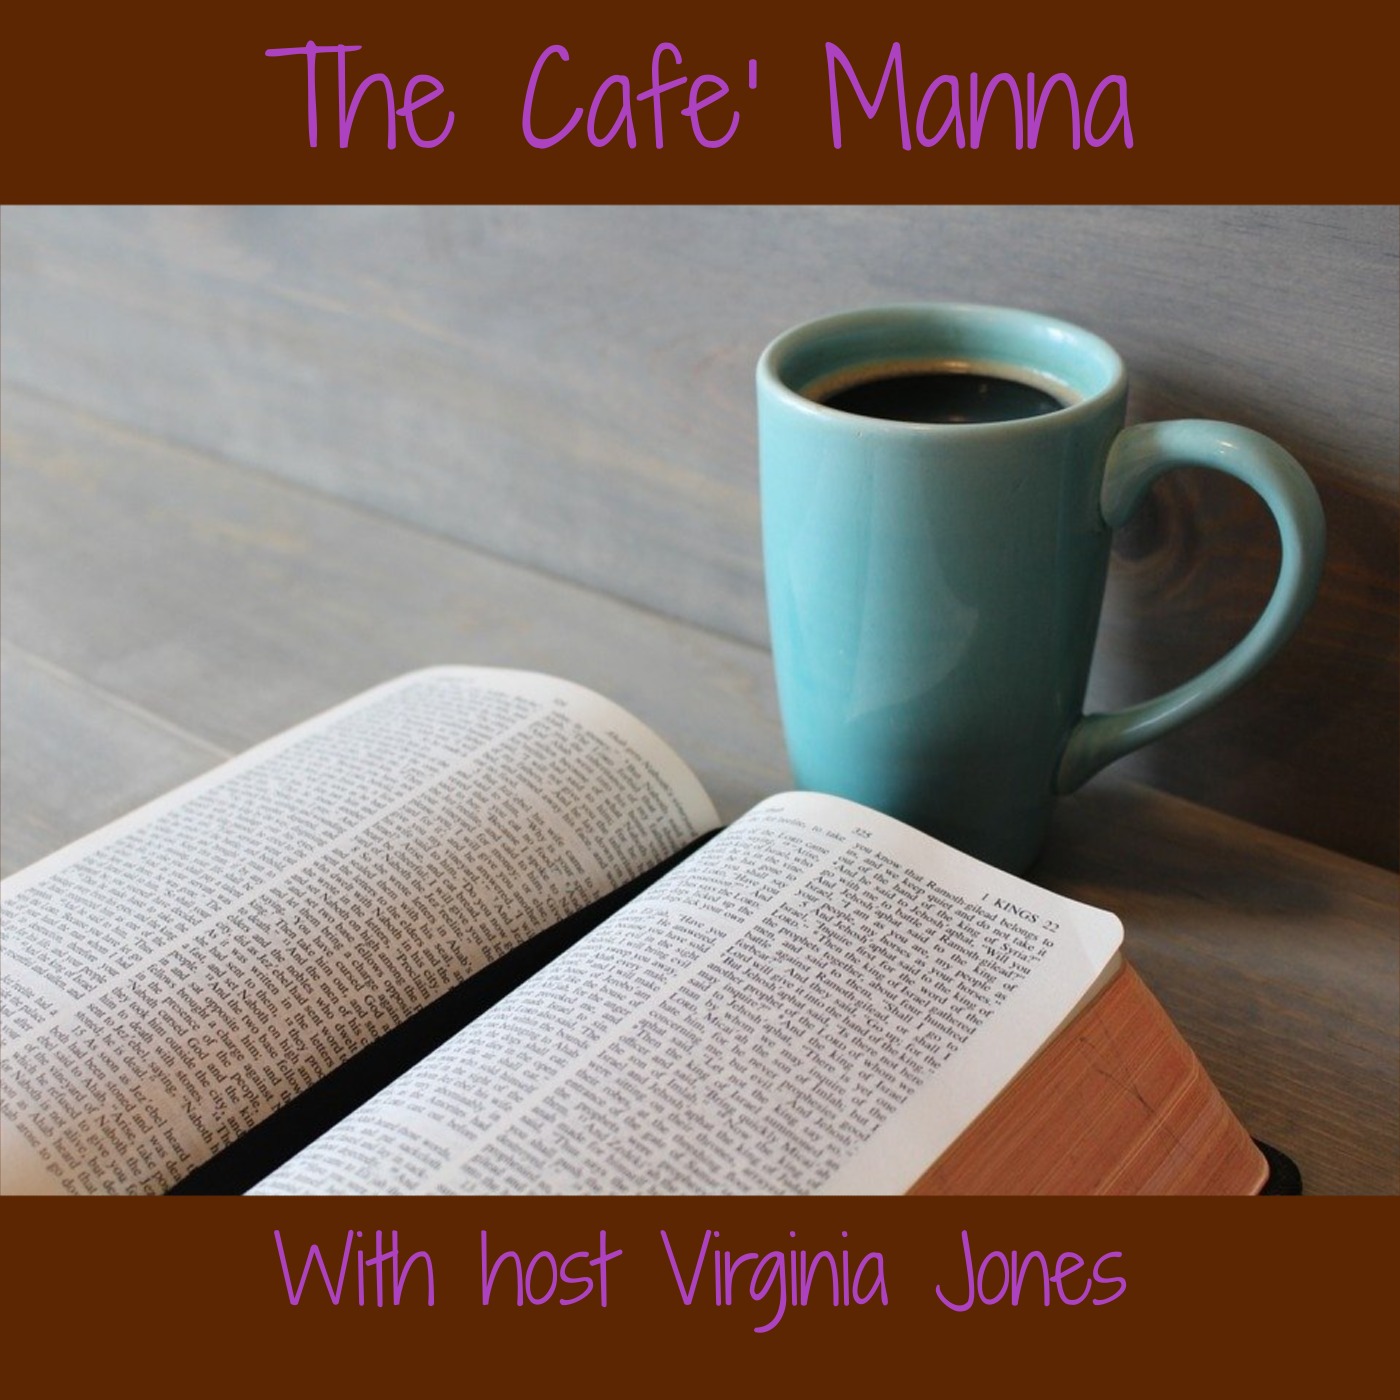 The Cafe’ Manna: The Virtuous Woman Image